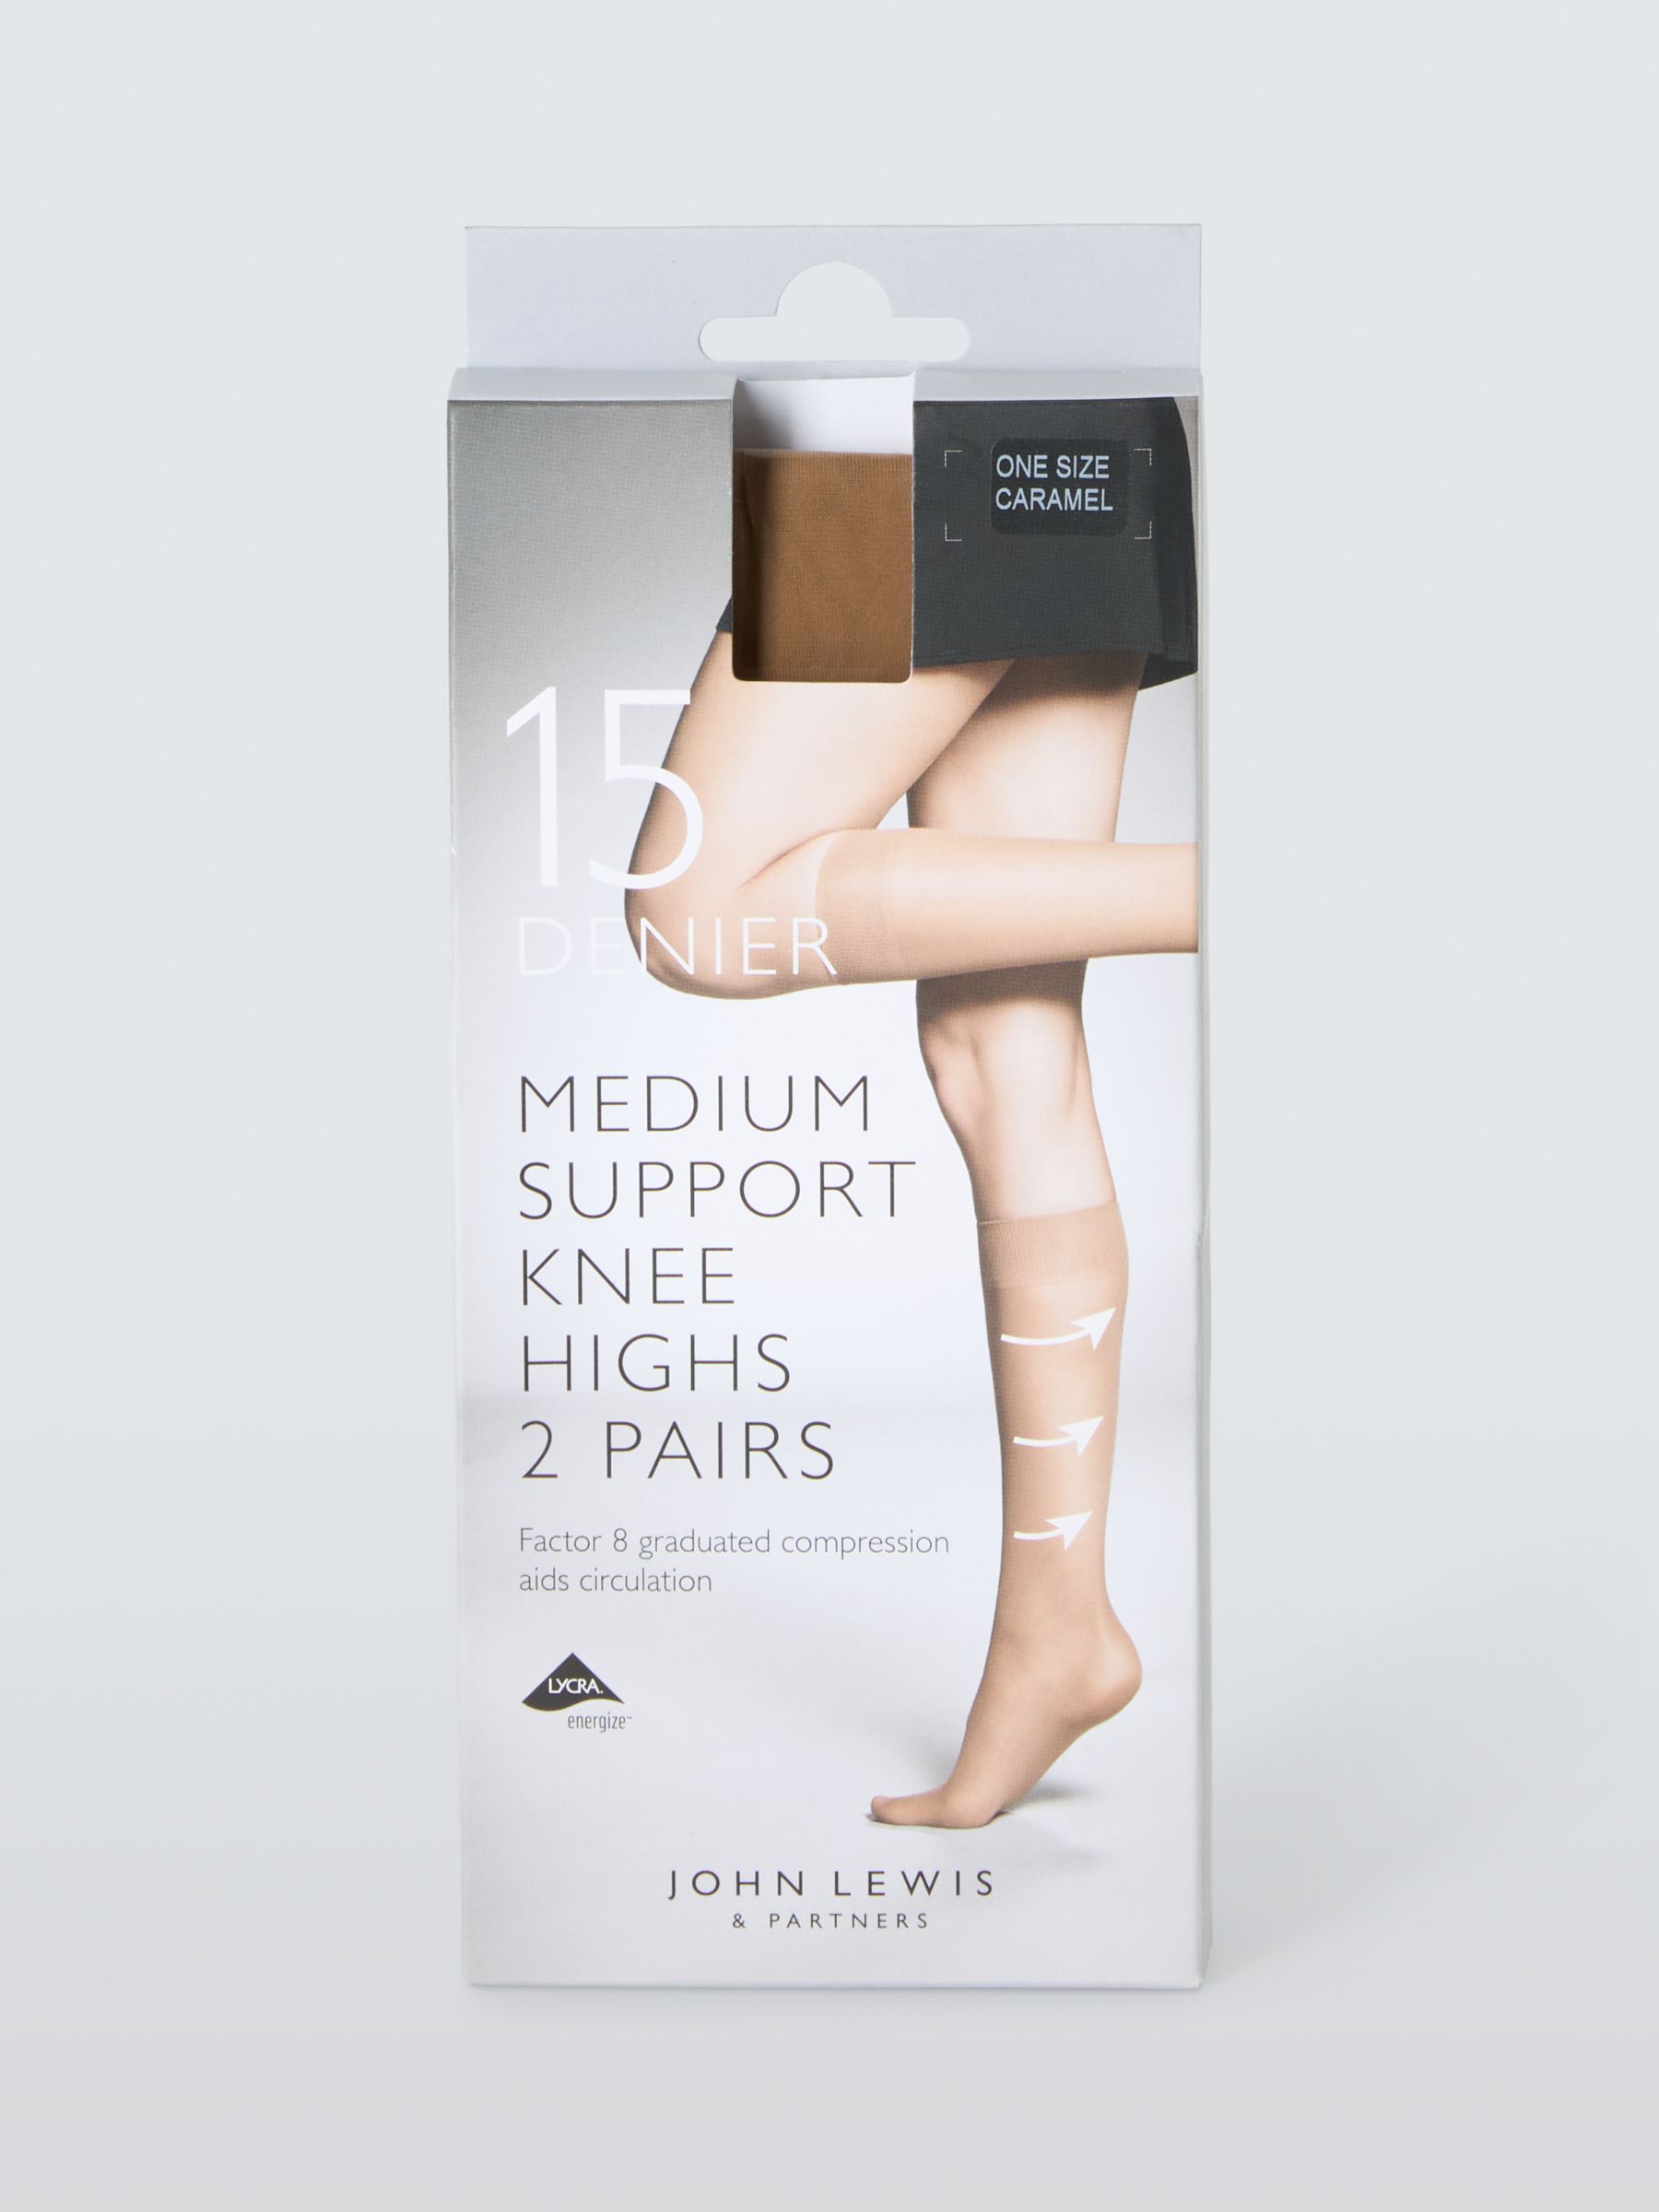 Wolford Satin Touch 20 Denier Stay Ups, Gobi at John Lewis & Partners